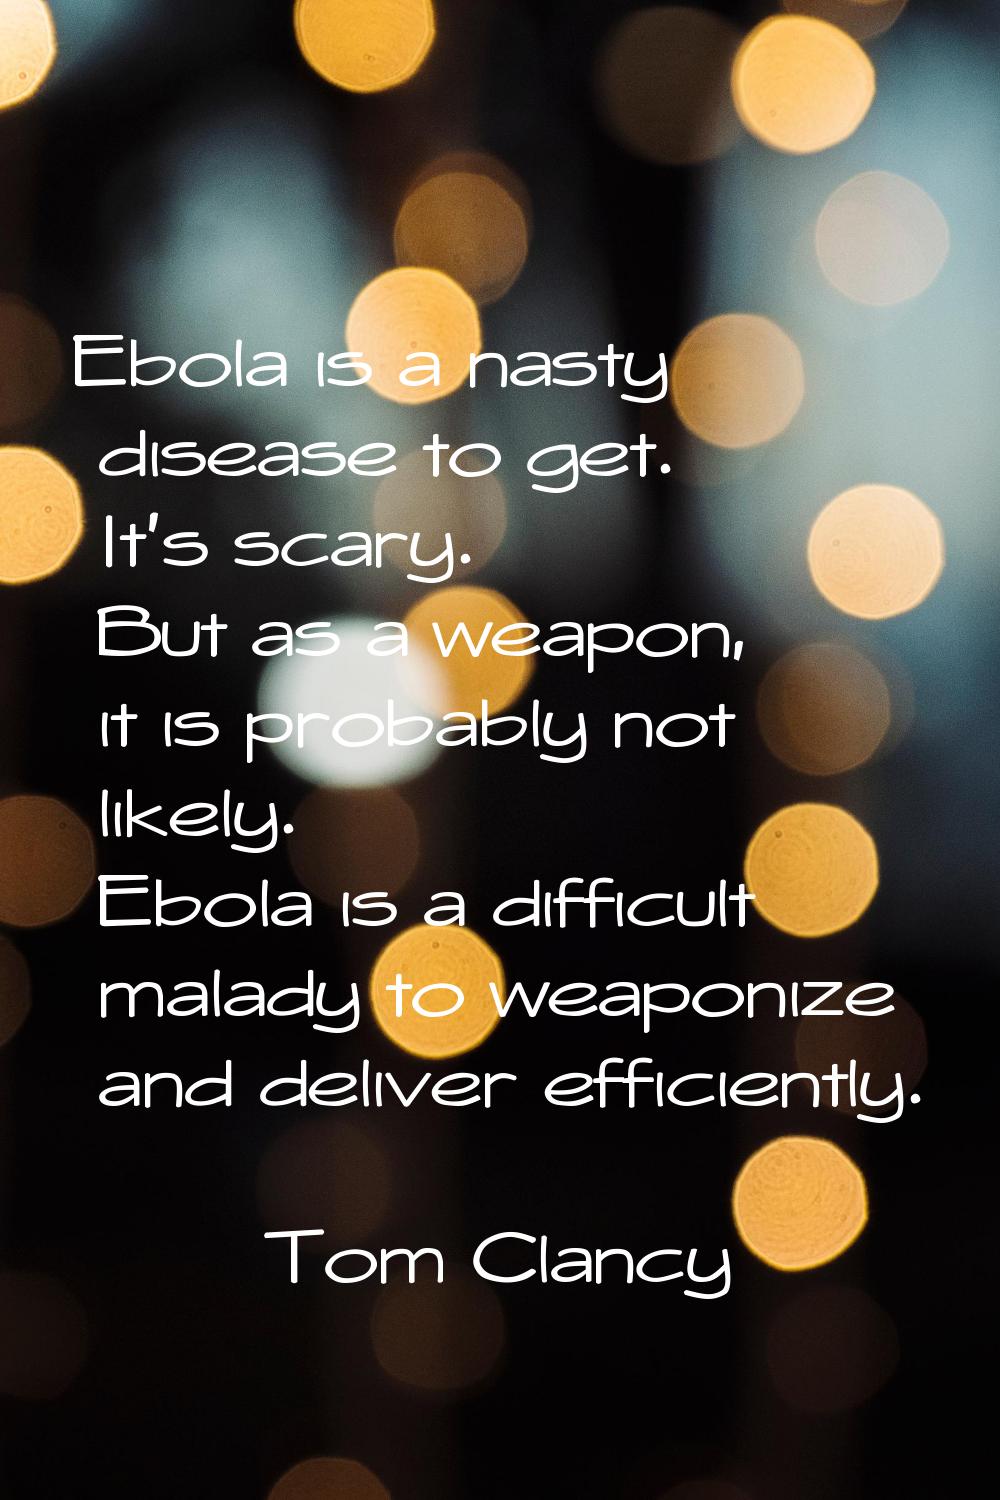 Ebola is a nasty disease to get. It's scary. But as a weapon, it is probably not likely. Ebola is a